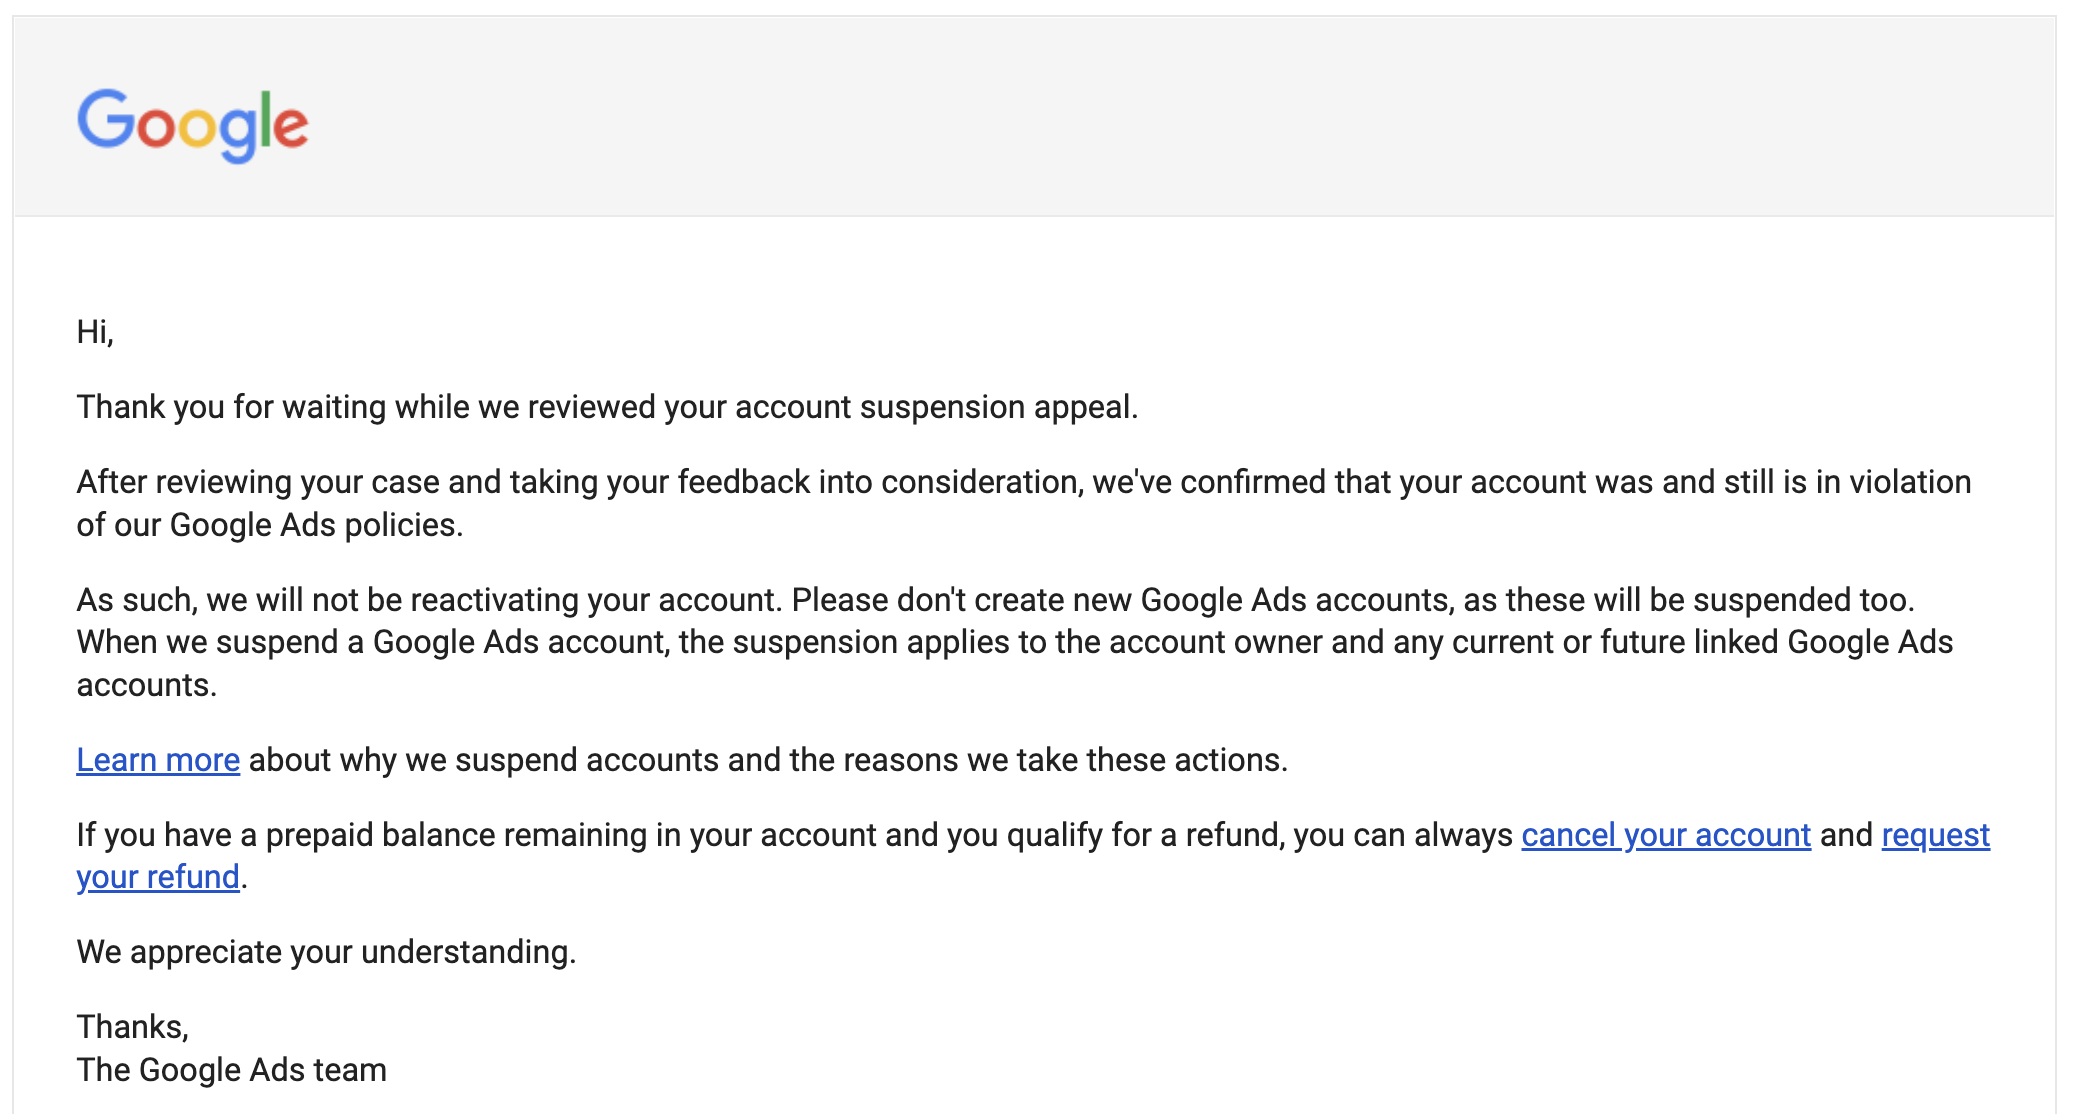 An email that says: after reviewing your case and taking your feedback into consideration, we've confirmed that your account was and still is in violation of our Google Ads policies.